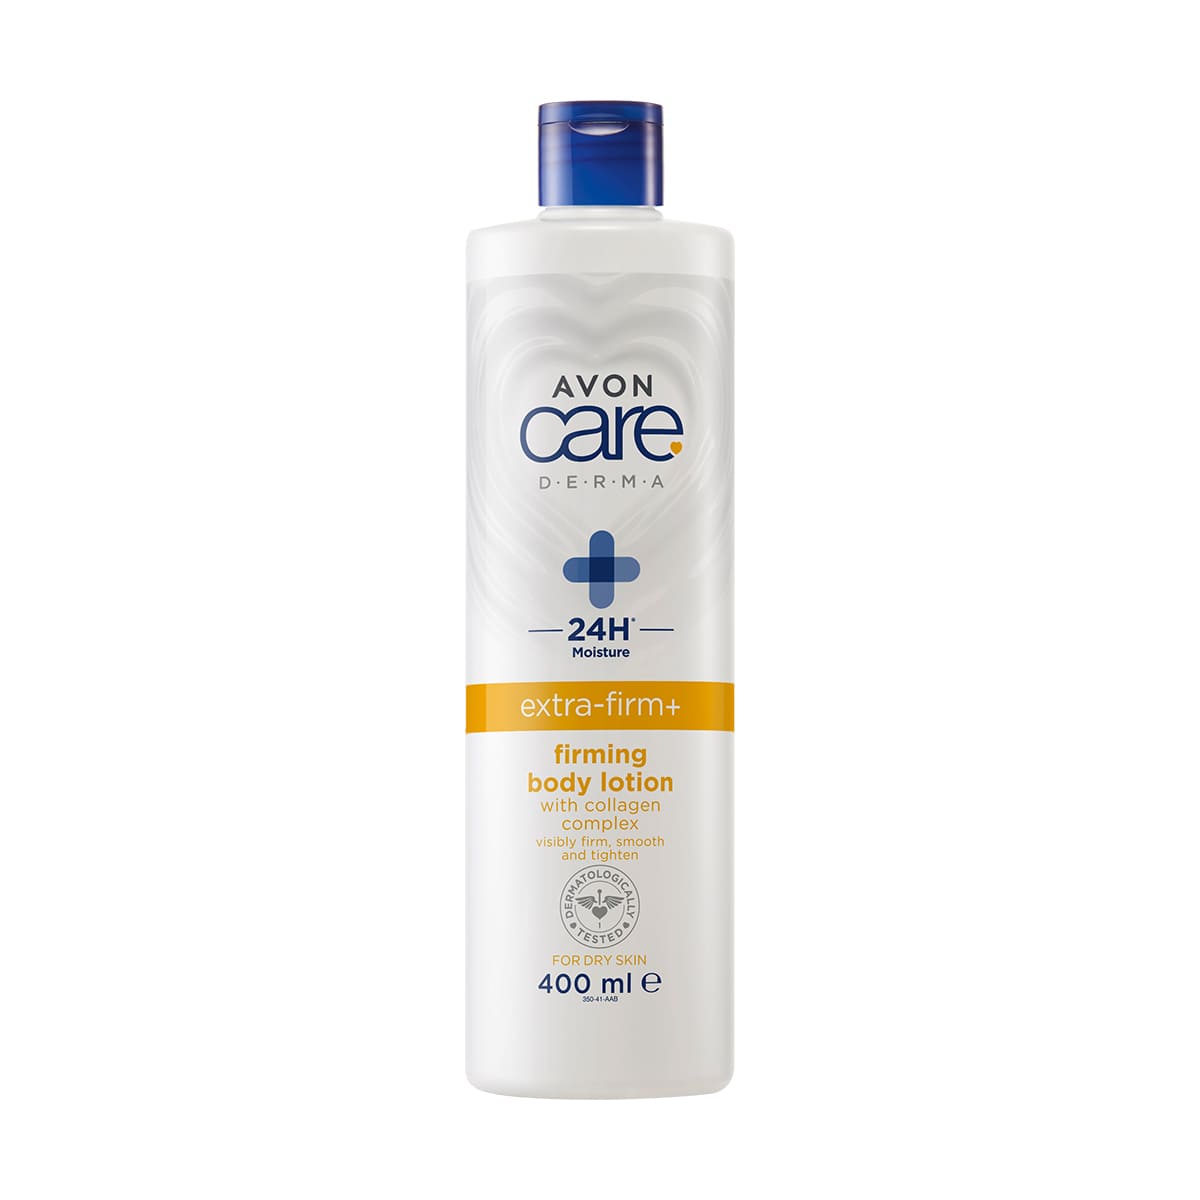 Avon Care Derma Extra Firm+ Lotion pour le Corps 400ml